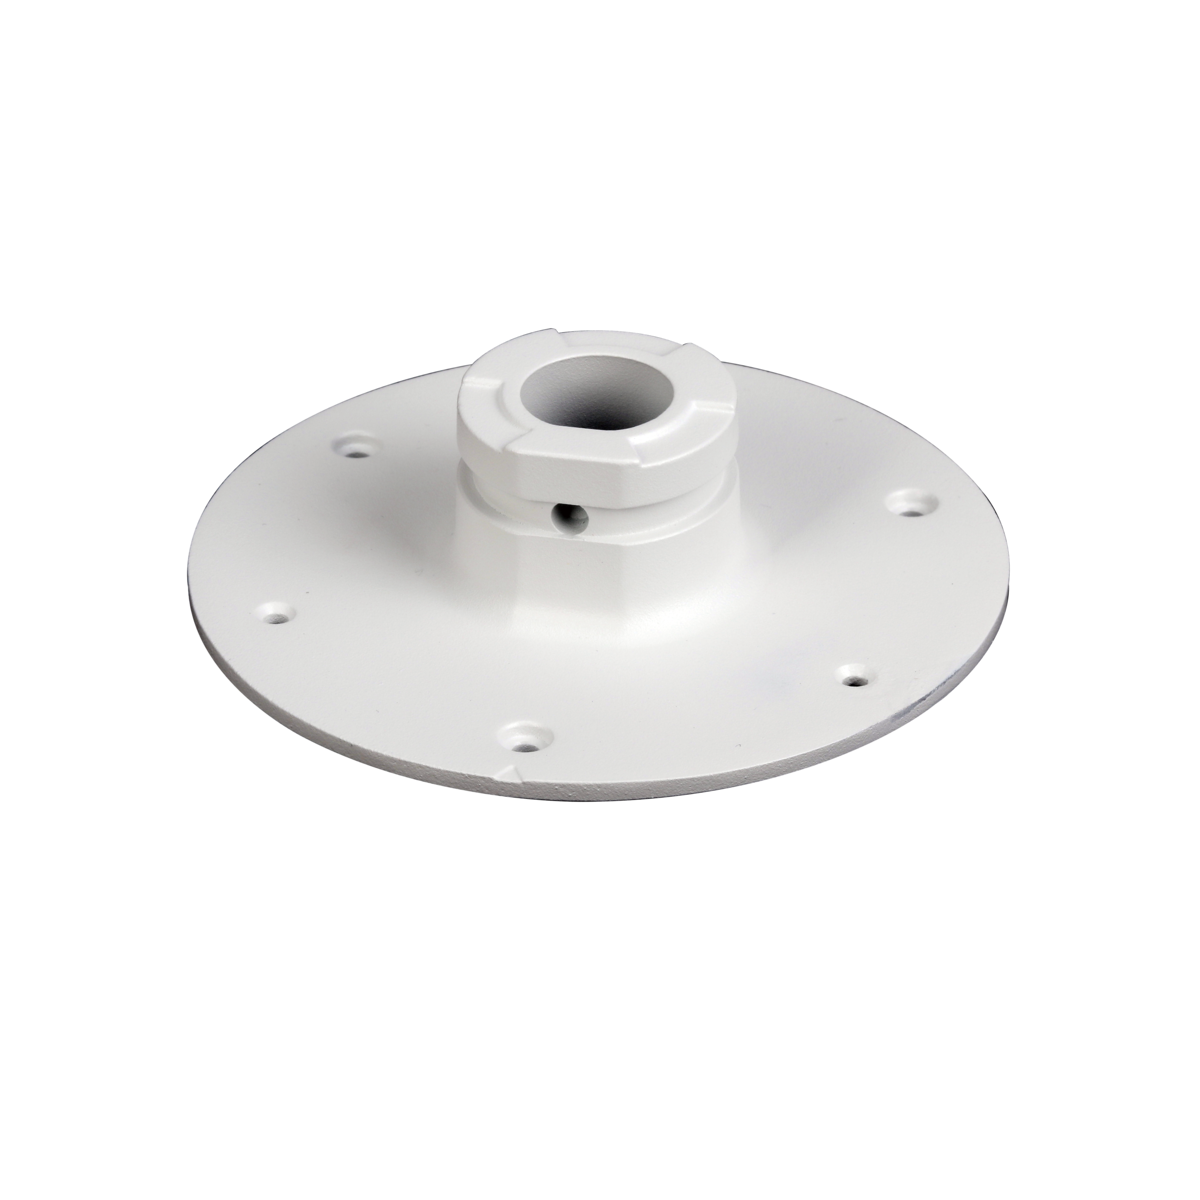 DAHUA MOUNT ADAPTER PLATE SUITS DOME WHITE ALUMINIUM 3 KG MAX LOAD 0.23 KG